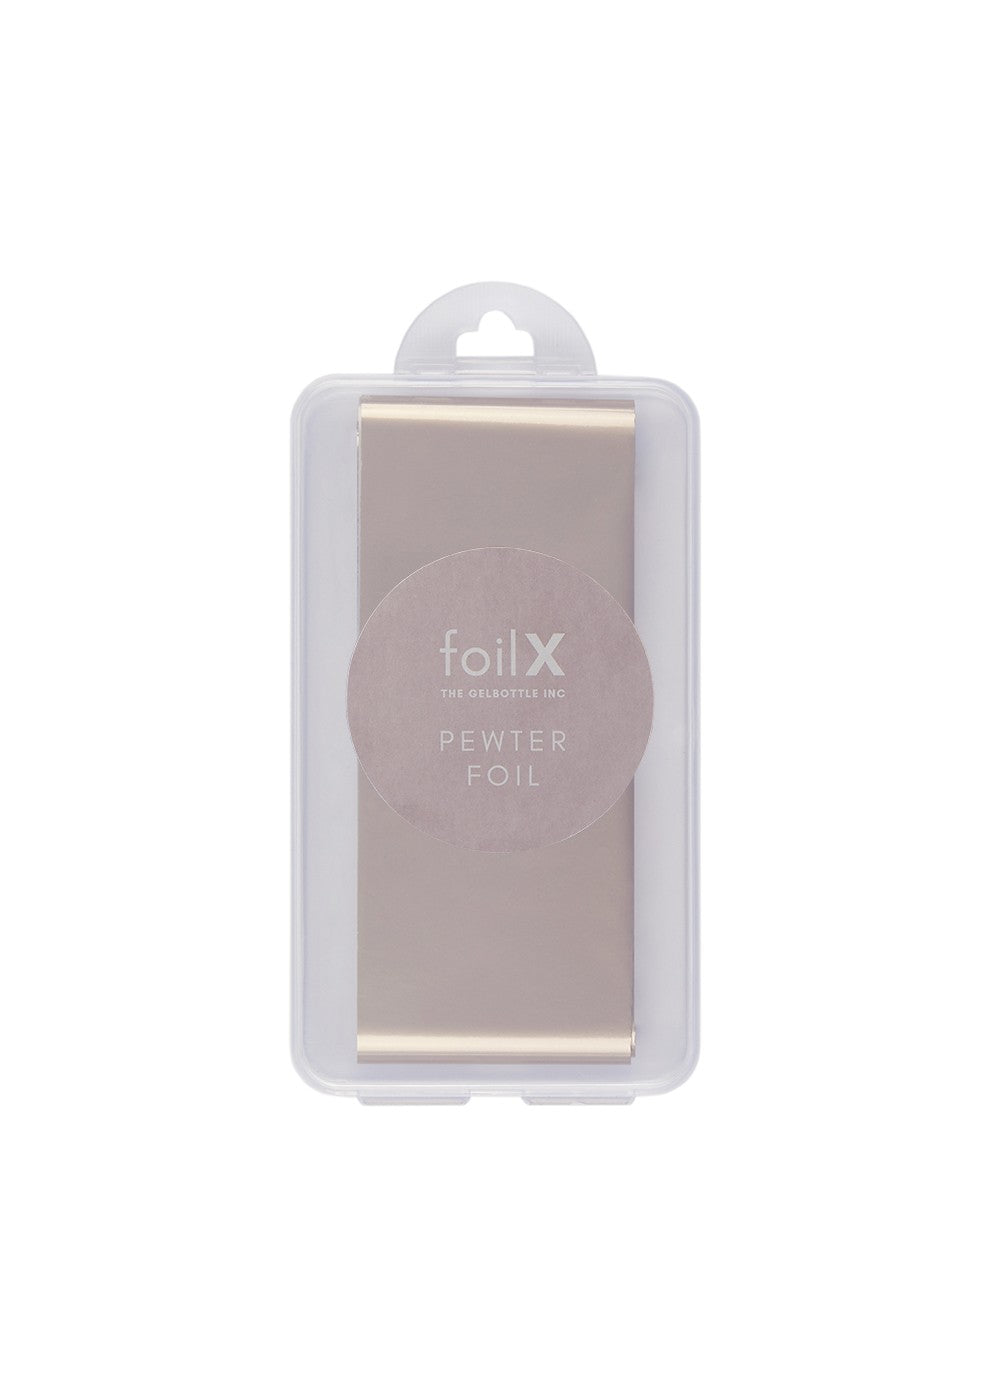 The GelBottle FoilX Pewter